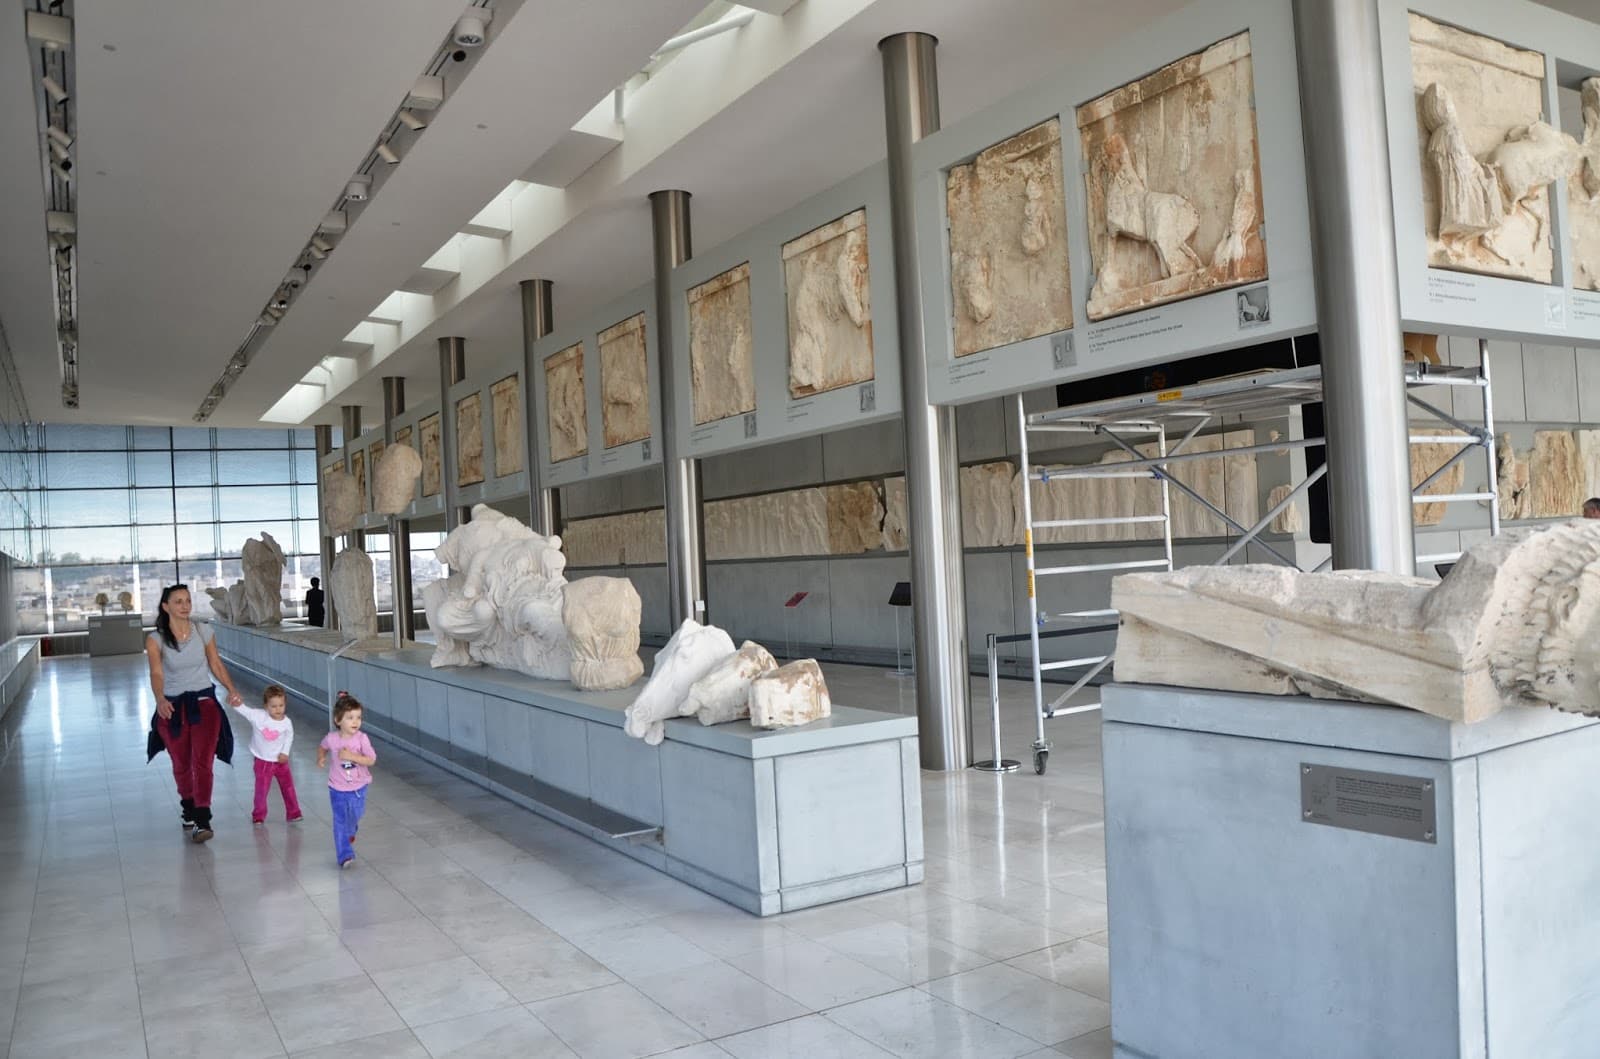 Parthenon Gallery at the Acropolis Museum in Athens, Greece